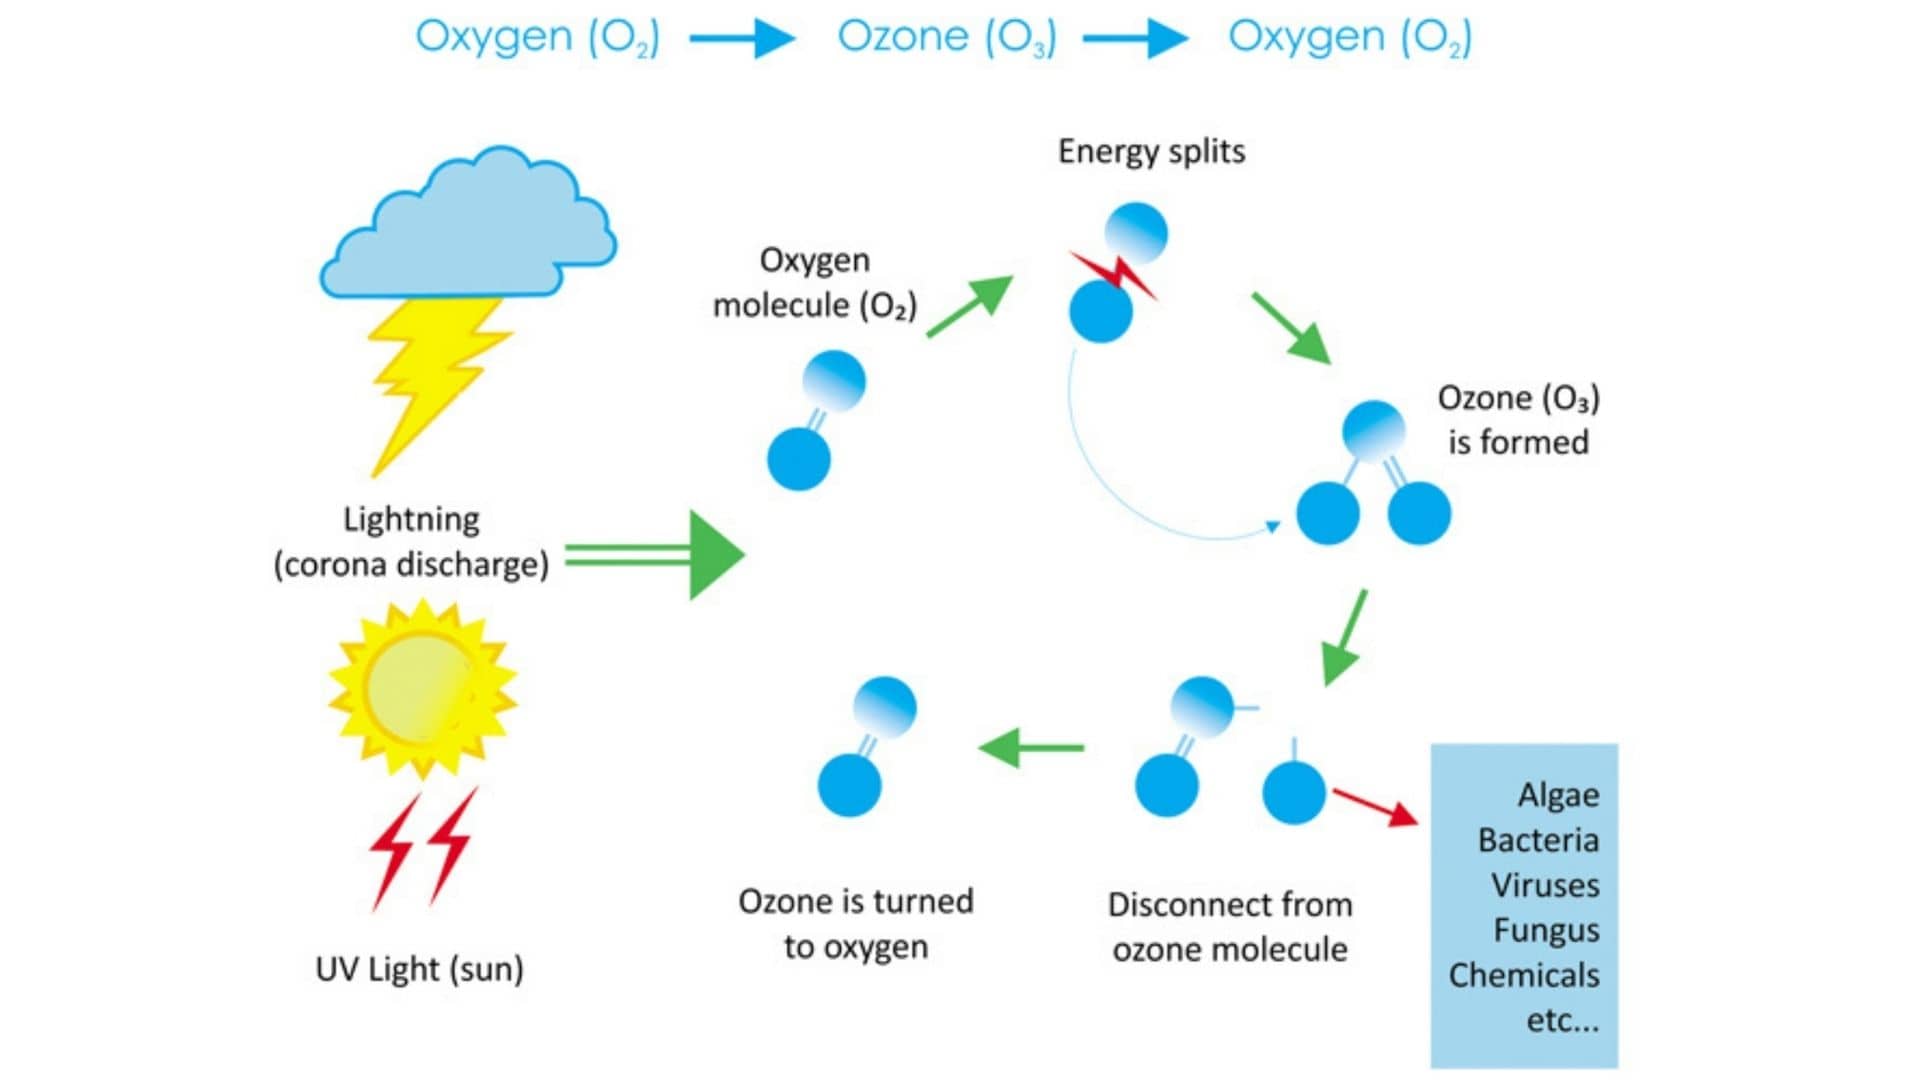 How is ozone formed?